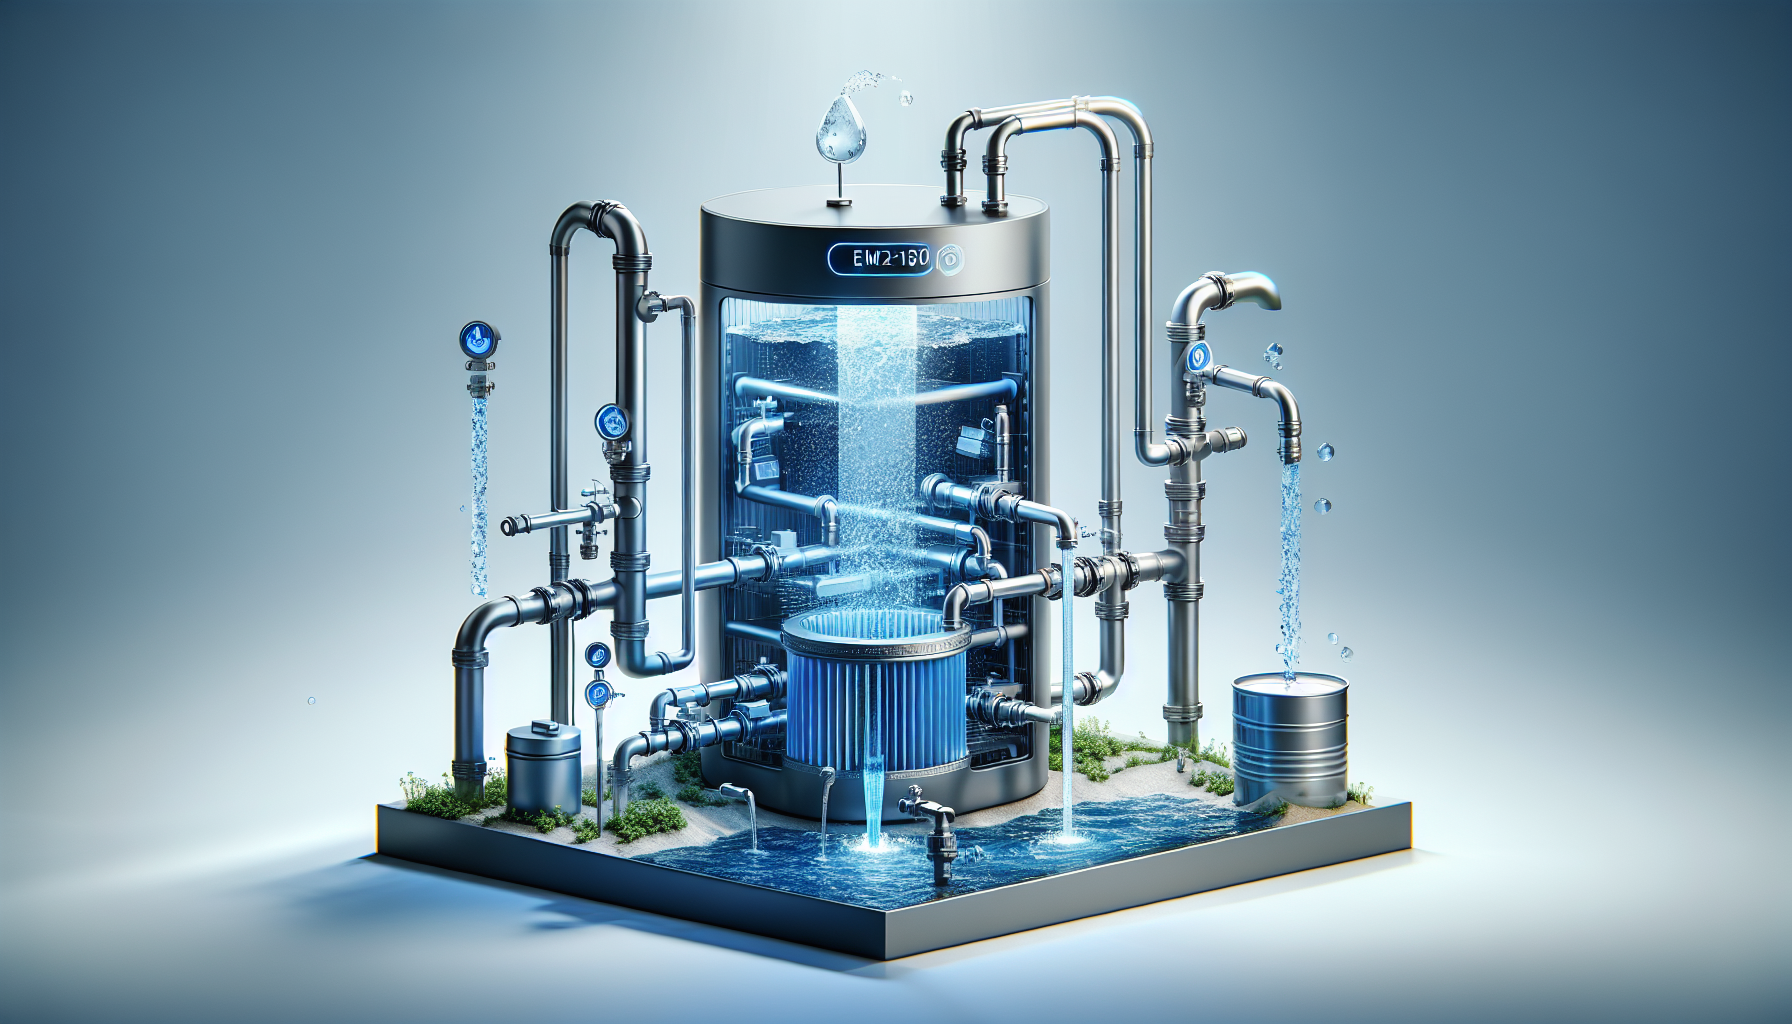 Illustration of high flow rate water filtration system